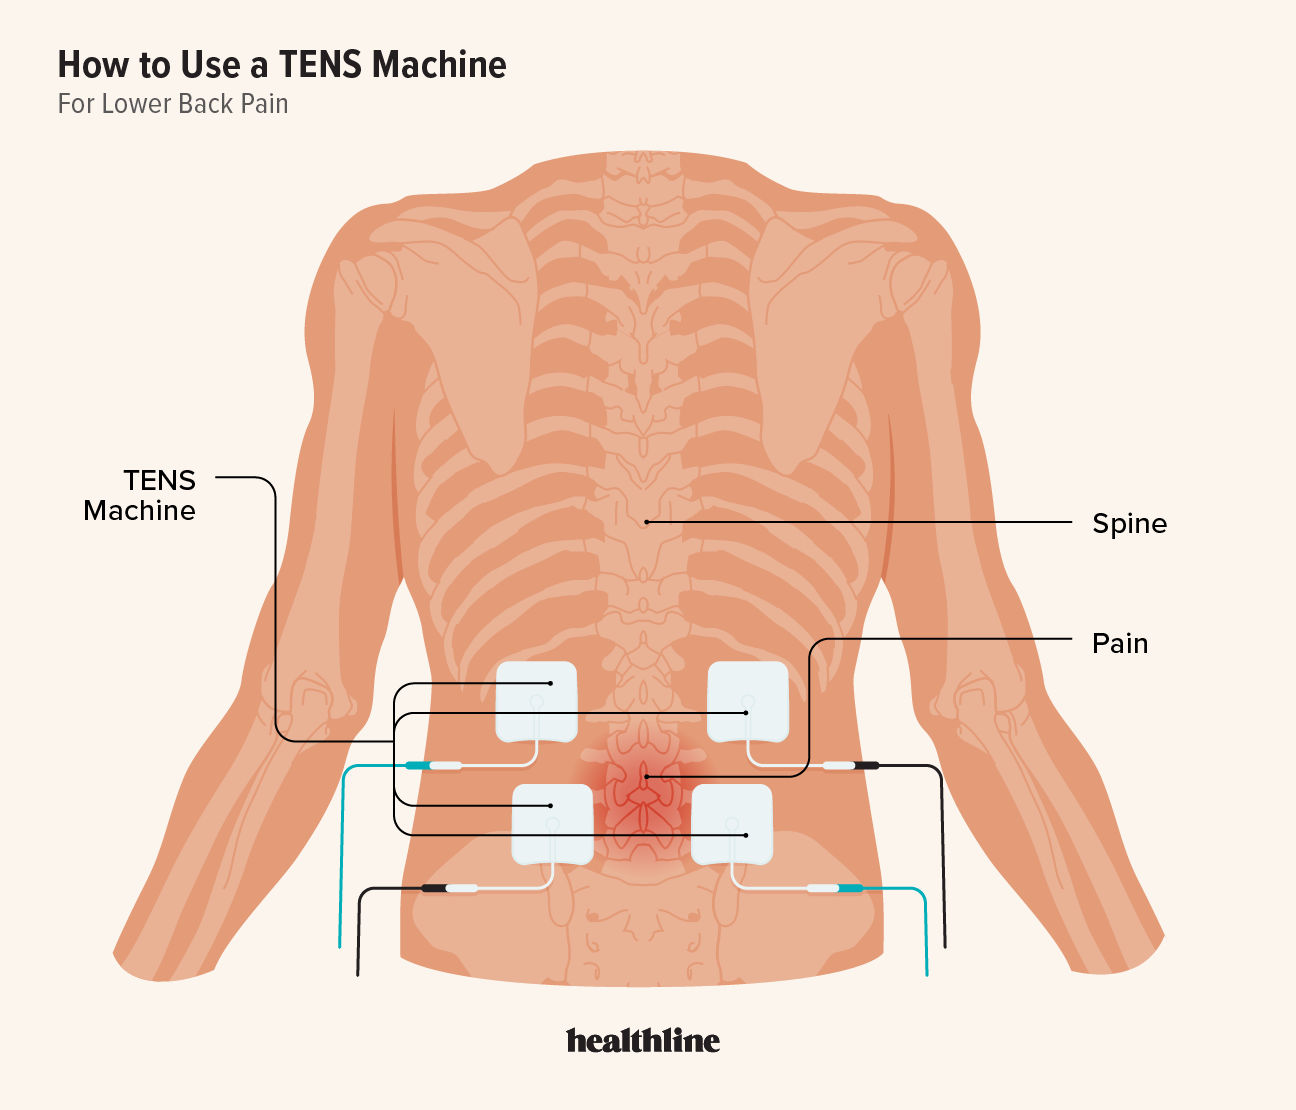 https://post.healthline.com/wp-content/uploads/2023/04/2853420-How-to-Use-a-TENS-Machine-for-Lower-Back-Pain_1296x1010-body.png